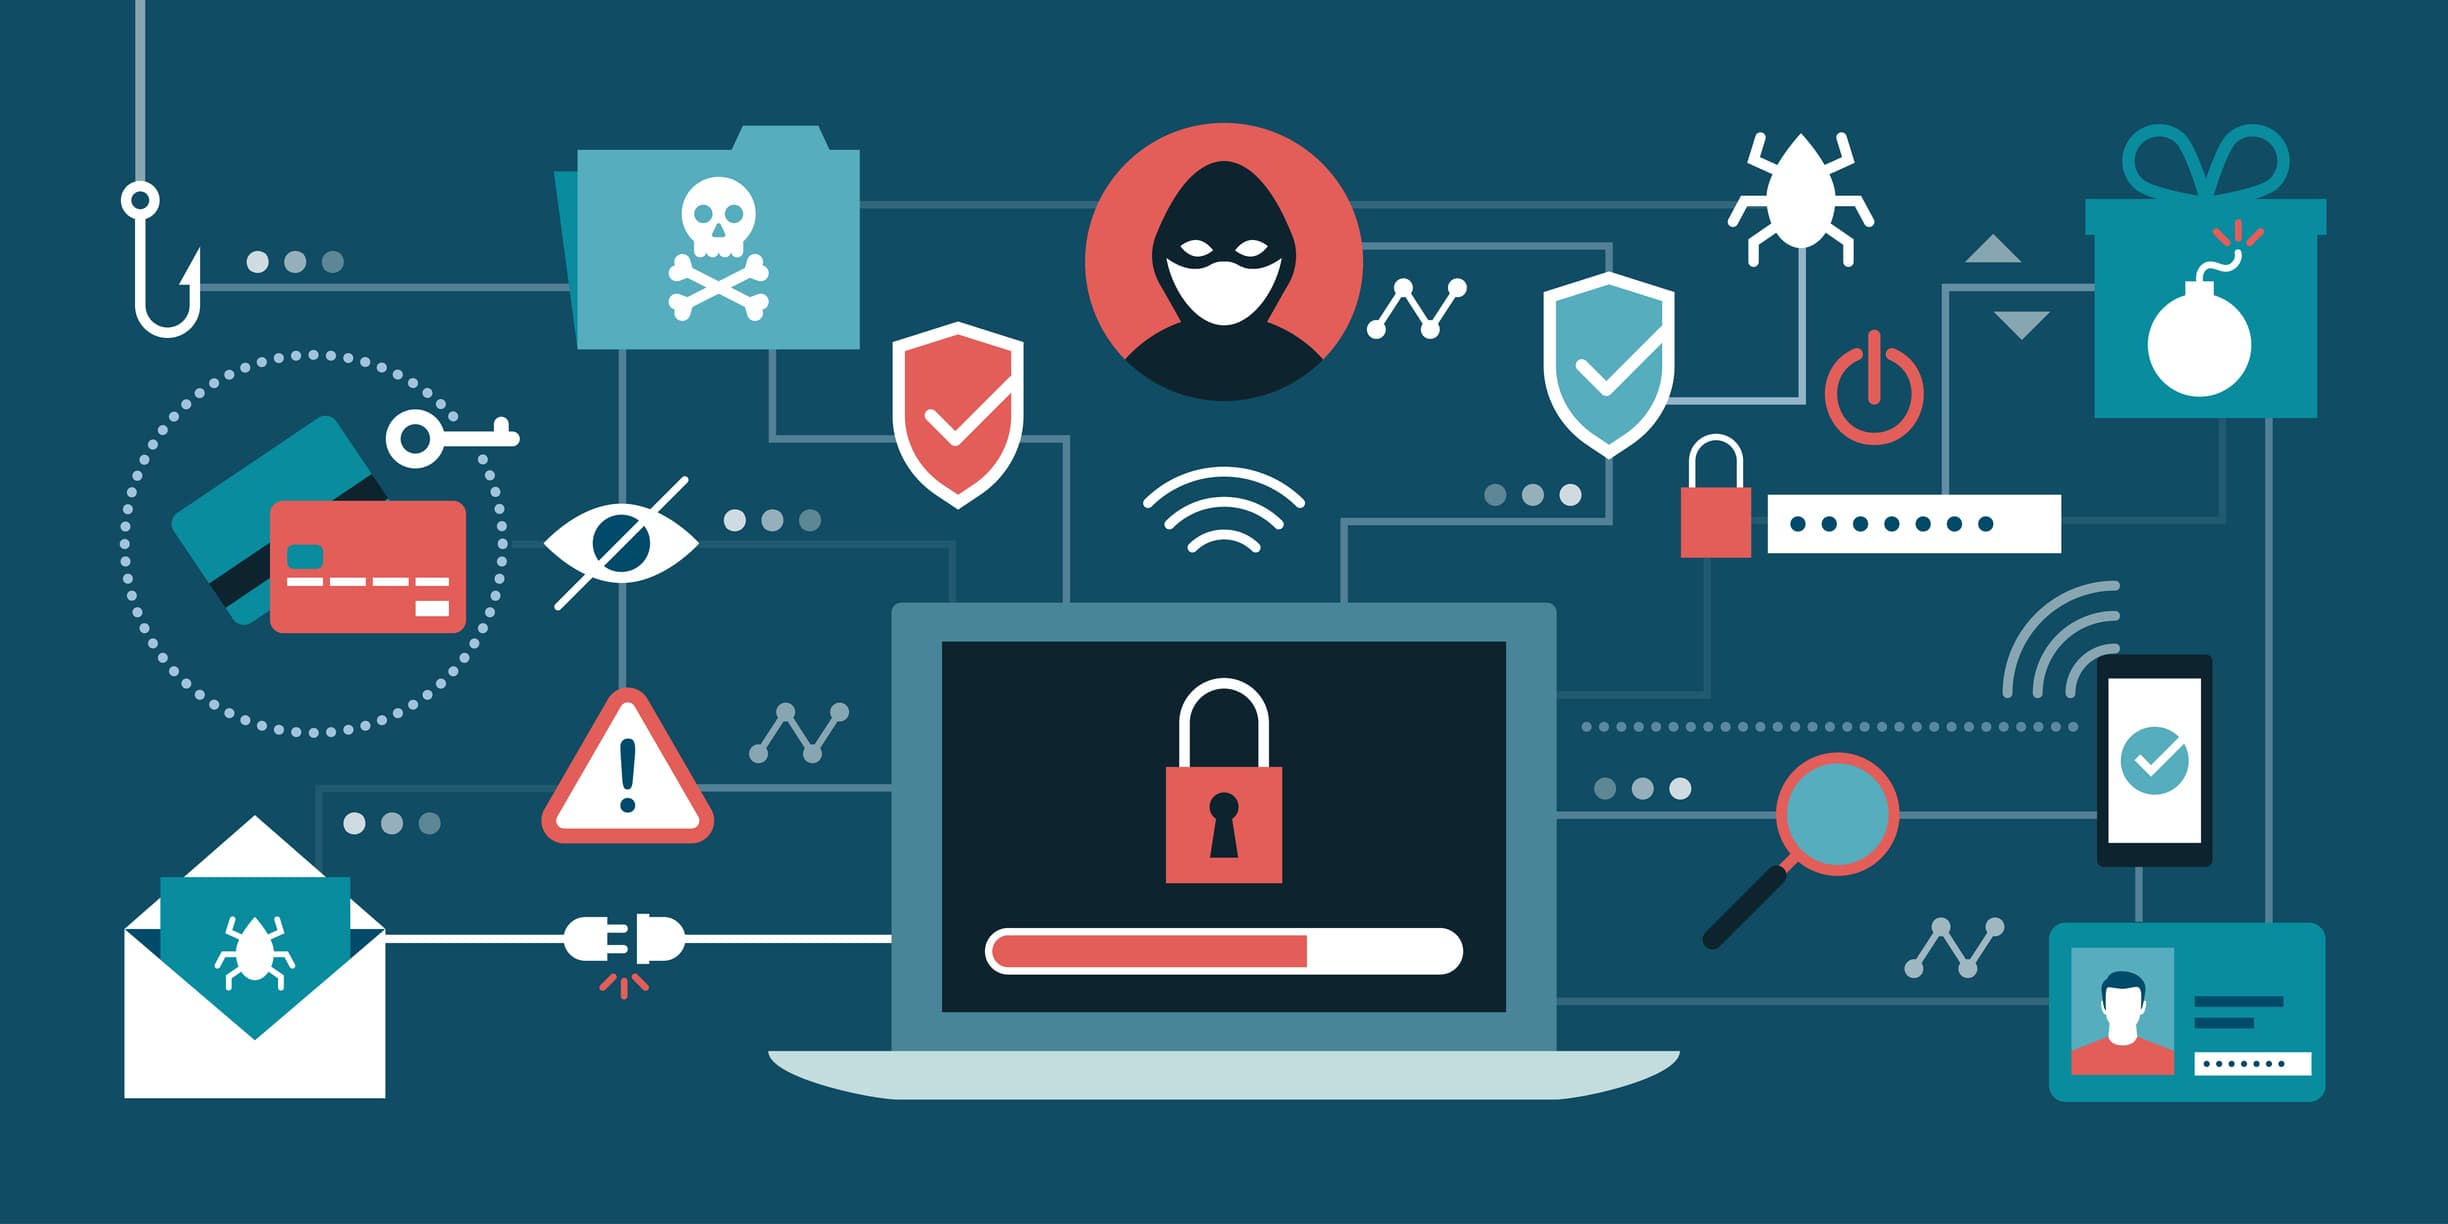 What are Cyber threats? How to prevent them?